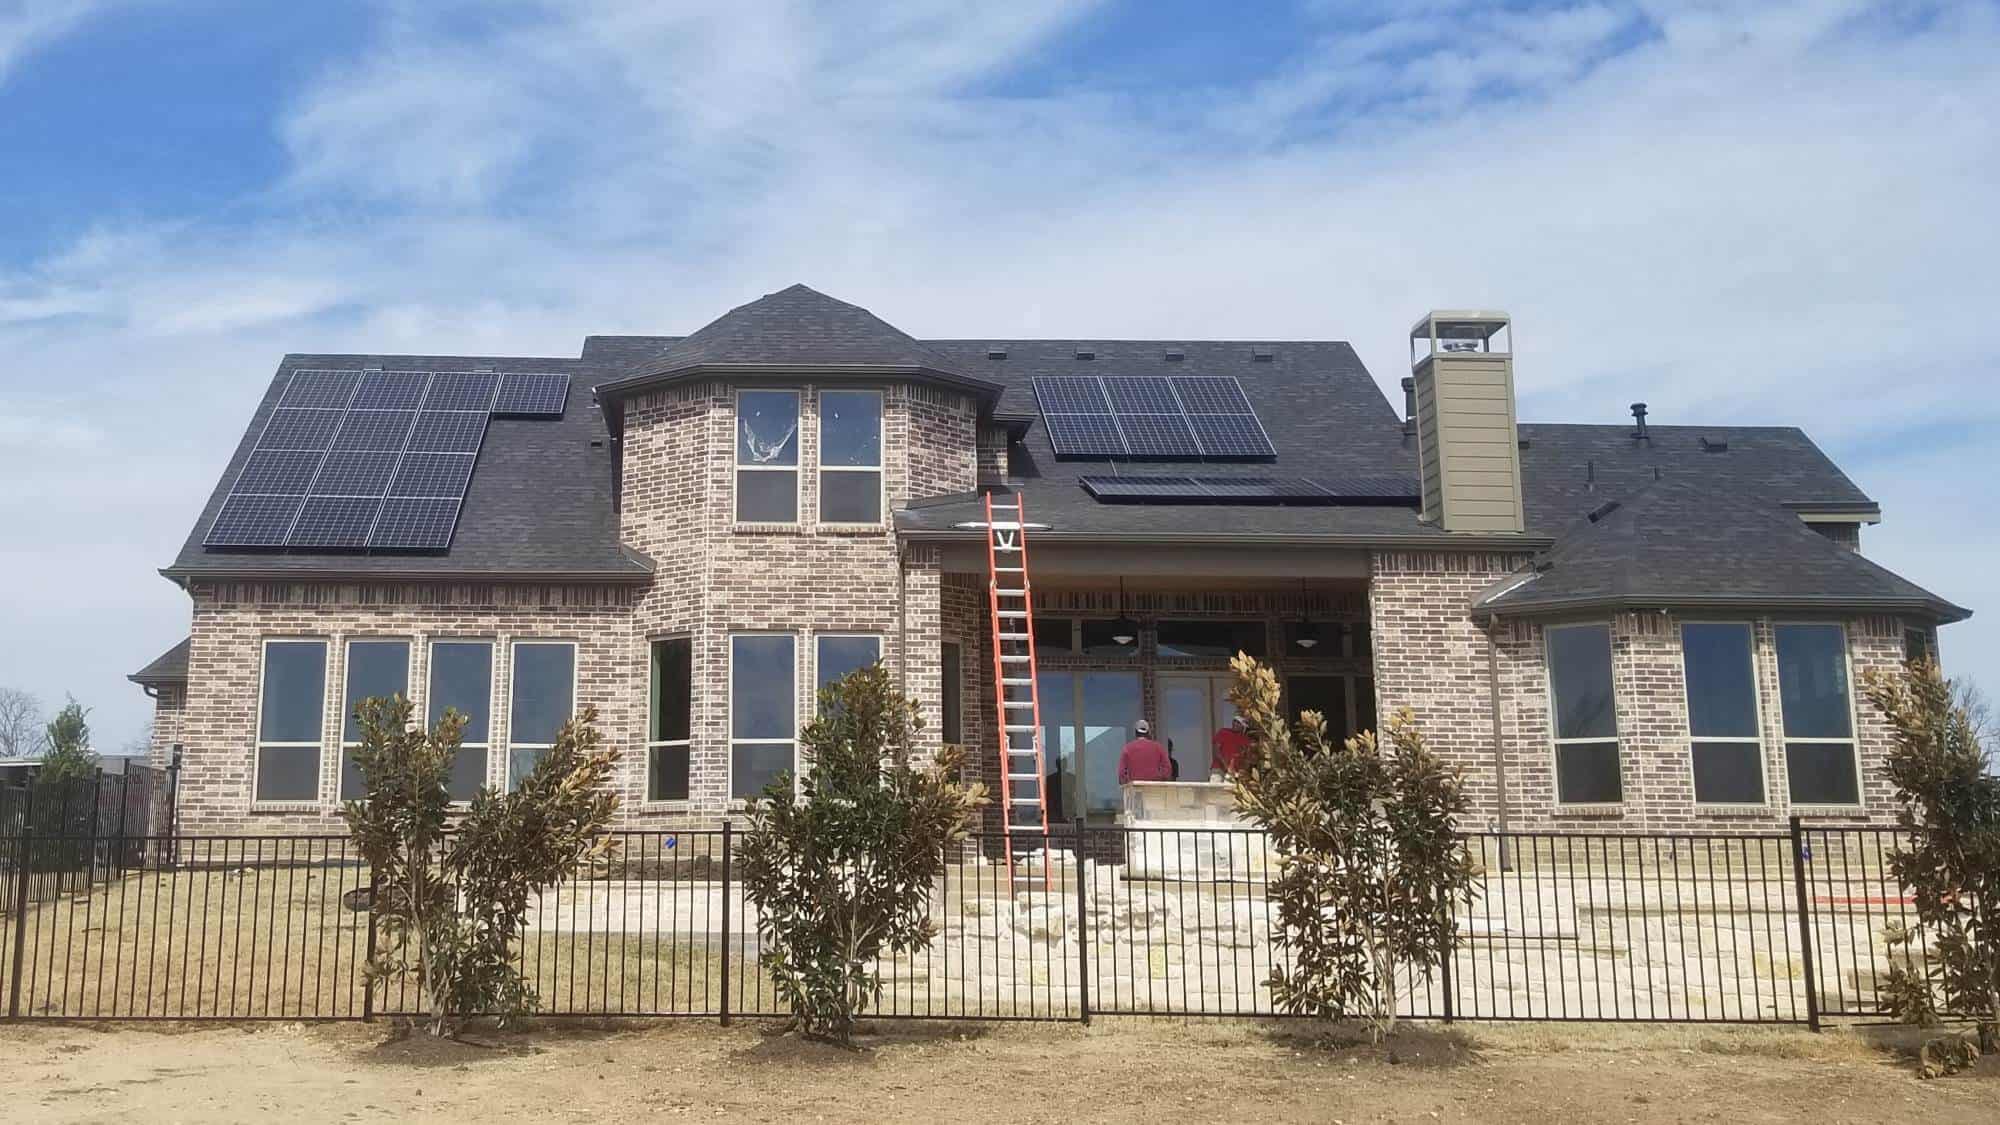 House front with men installing solar panels on the roof in Arlington, Texas